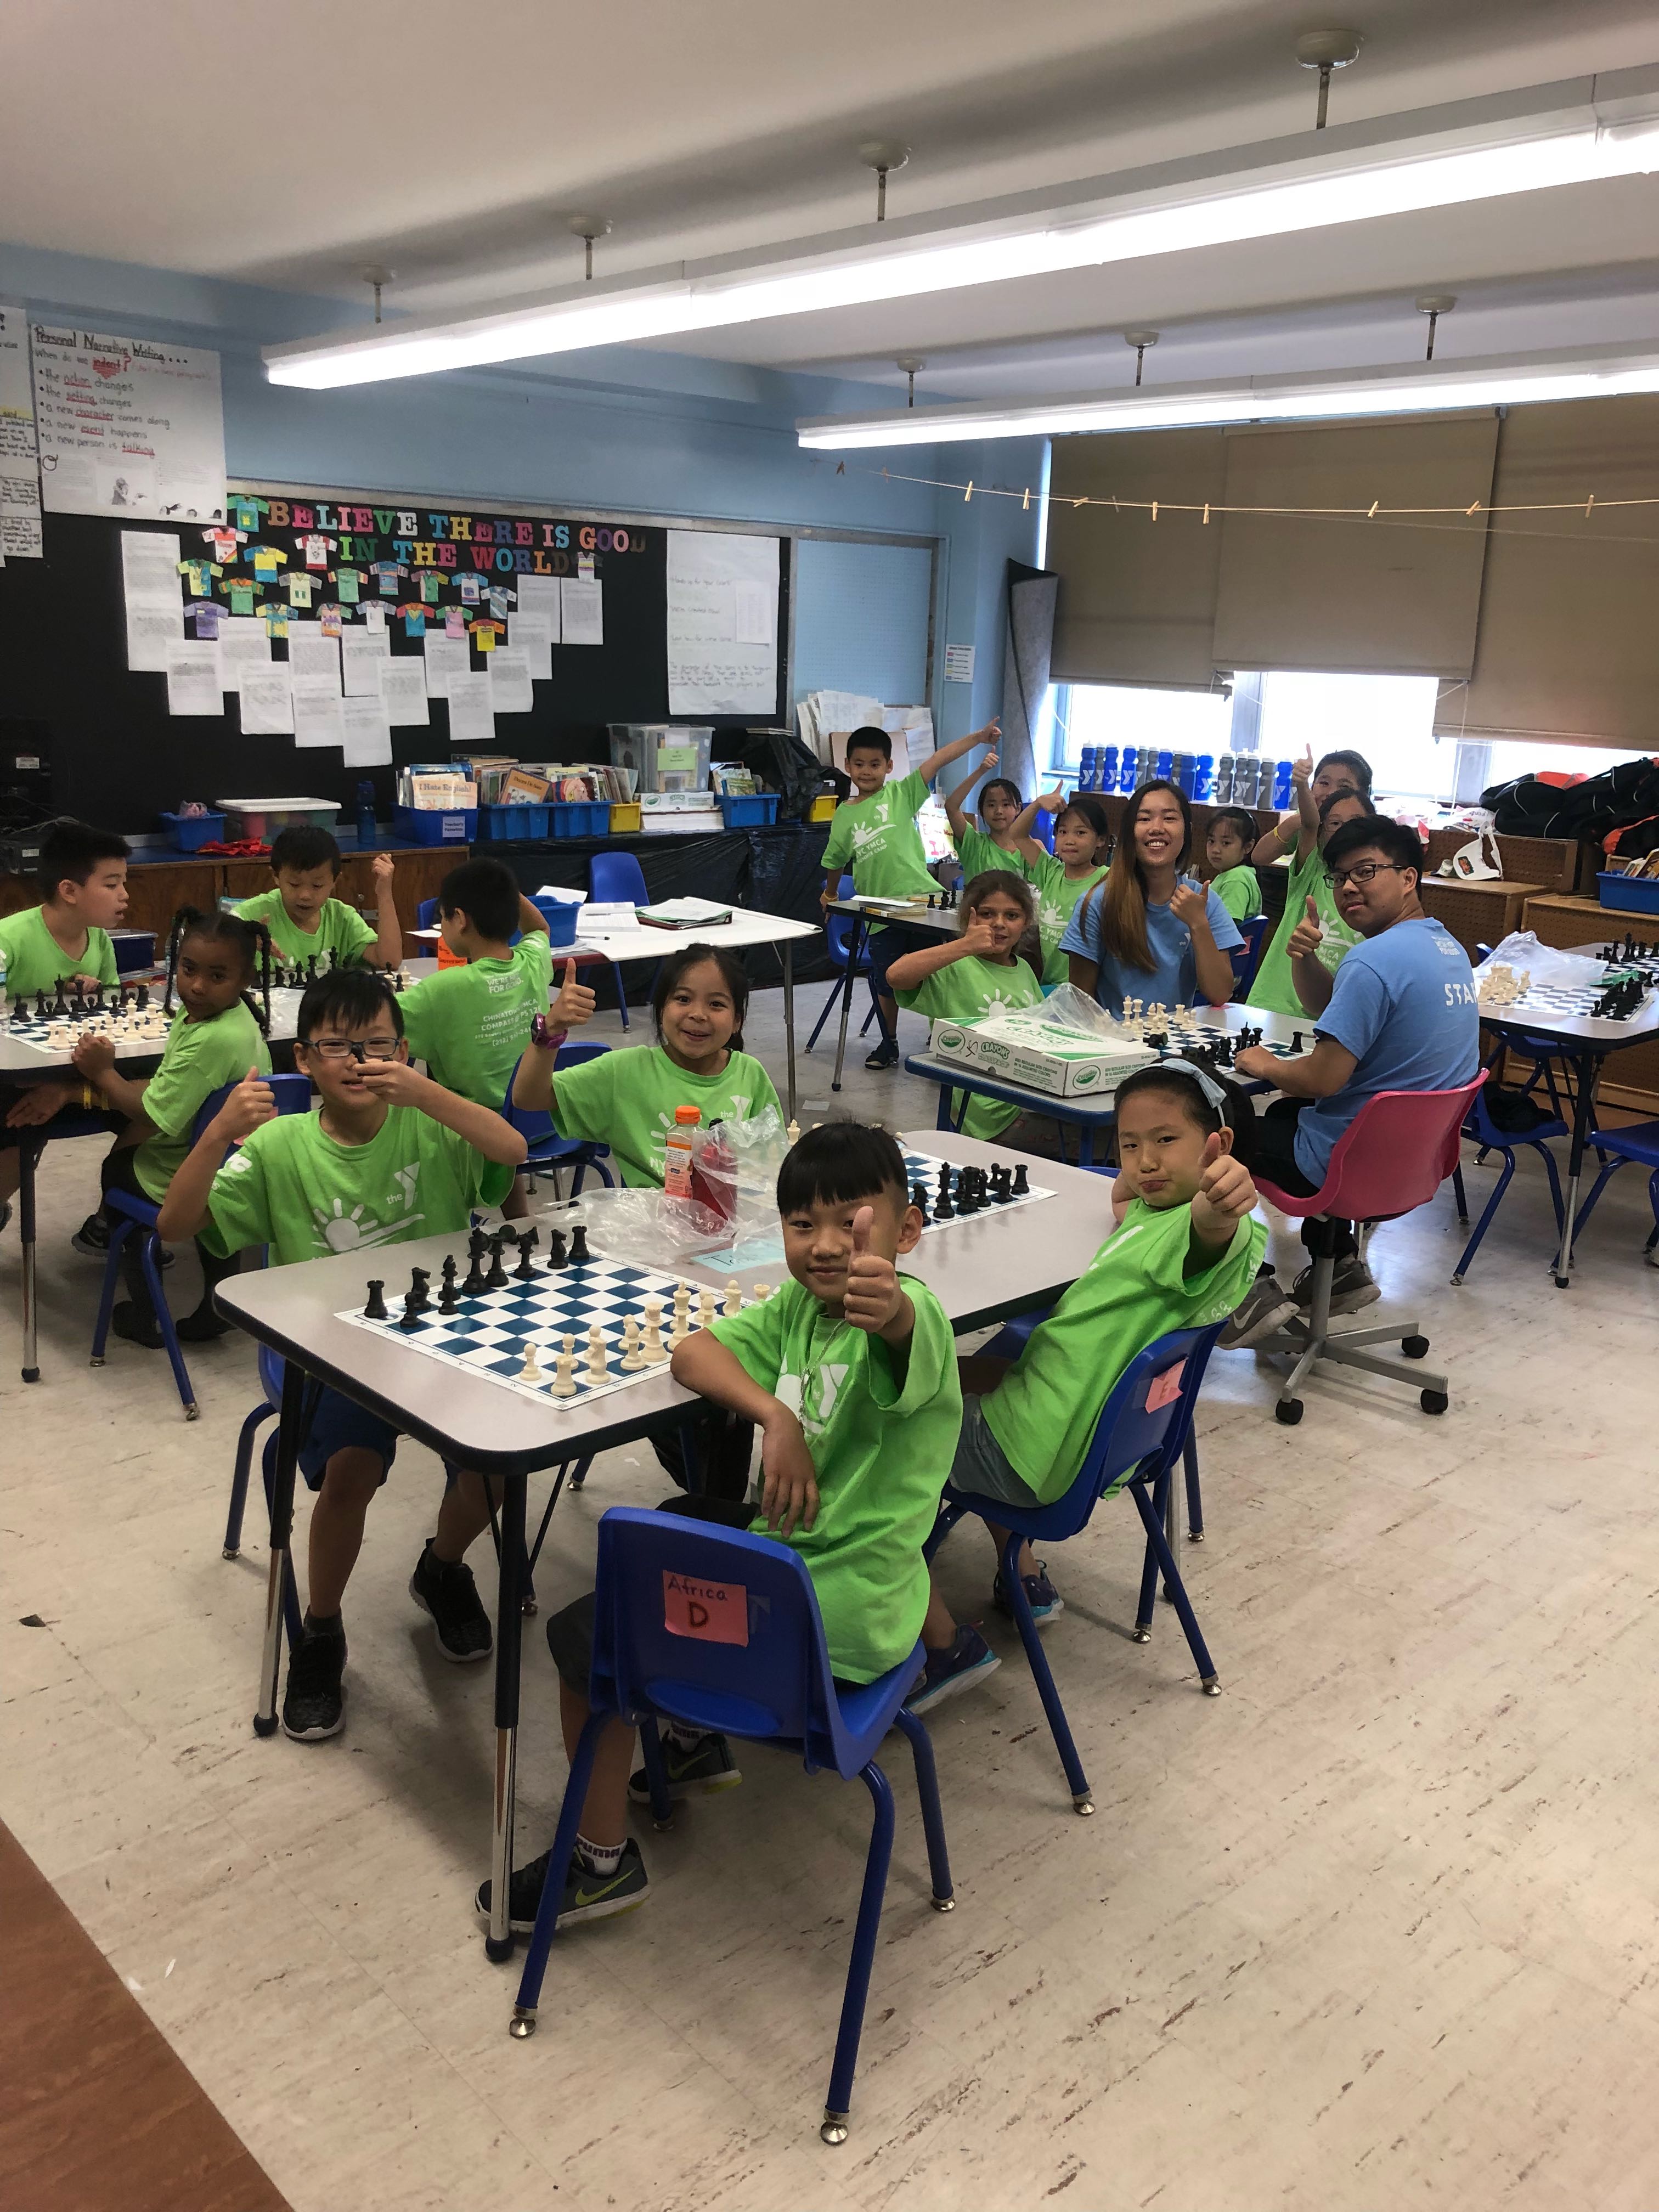 Learn chess or learn to teach it. LINC's free summer programs open